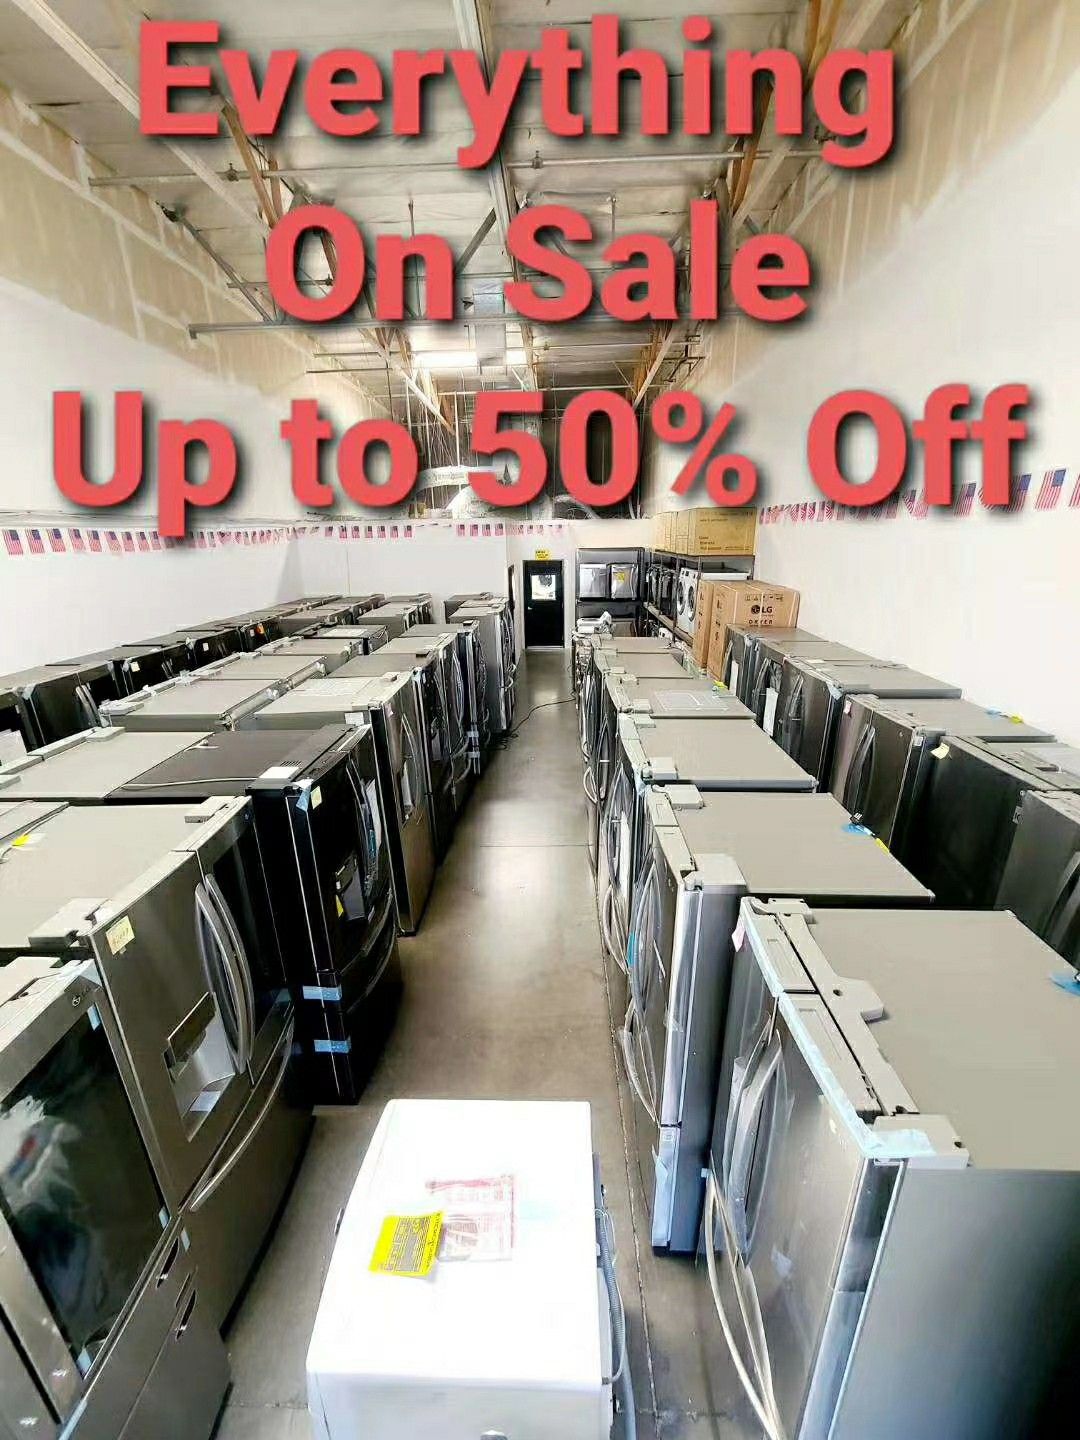 Appliances 4 Less Las Vegas, Save Up to 50% Off, Refrigerators, Washers, Dryers, Microwaves, Dishwashers, Stoves, Ovens, Ranges, Best Deal, Super Sale